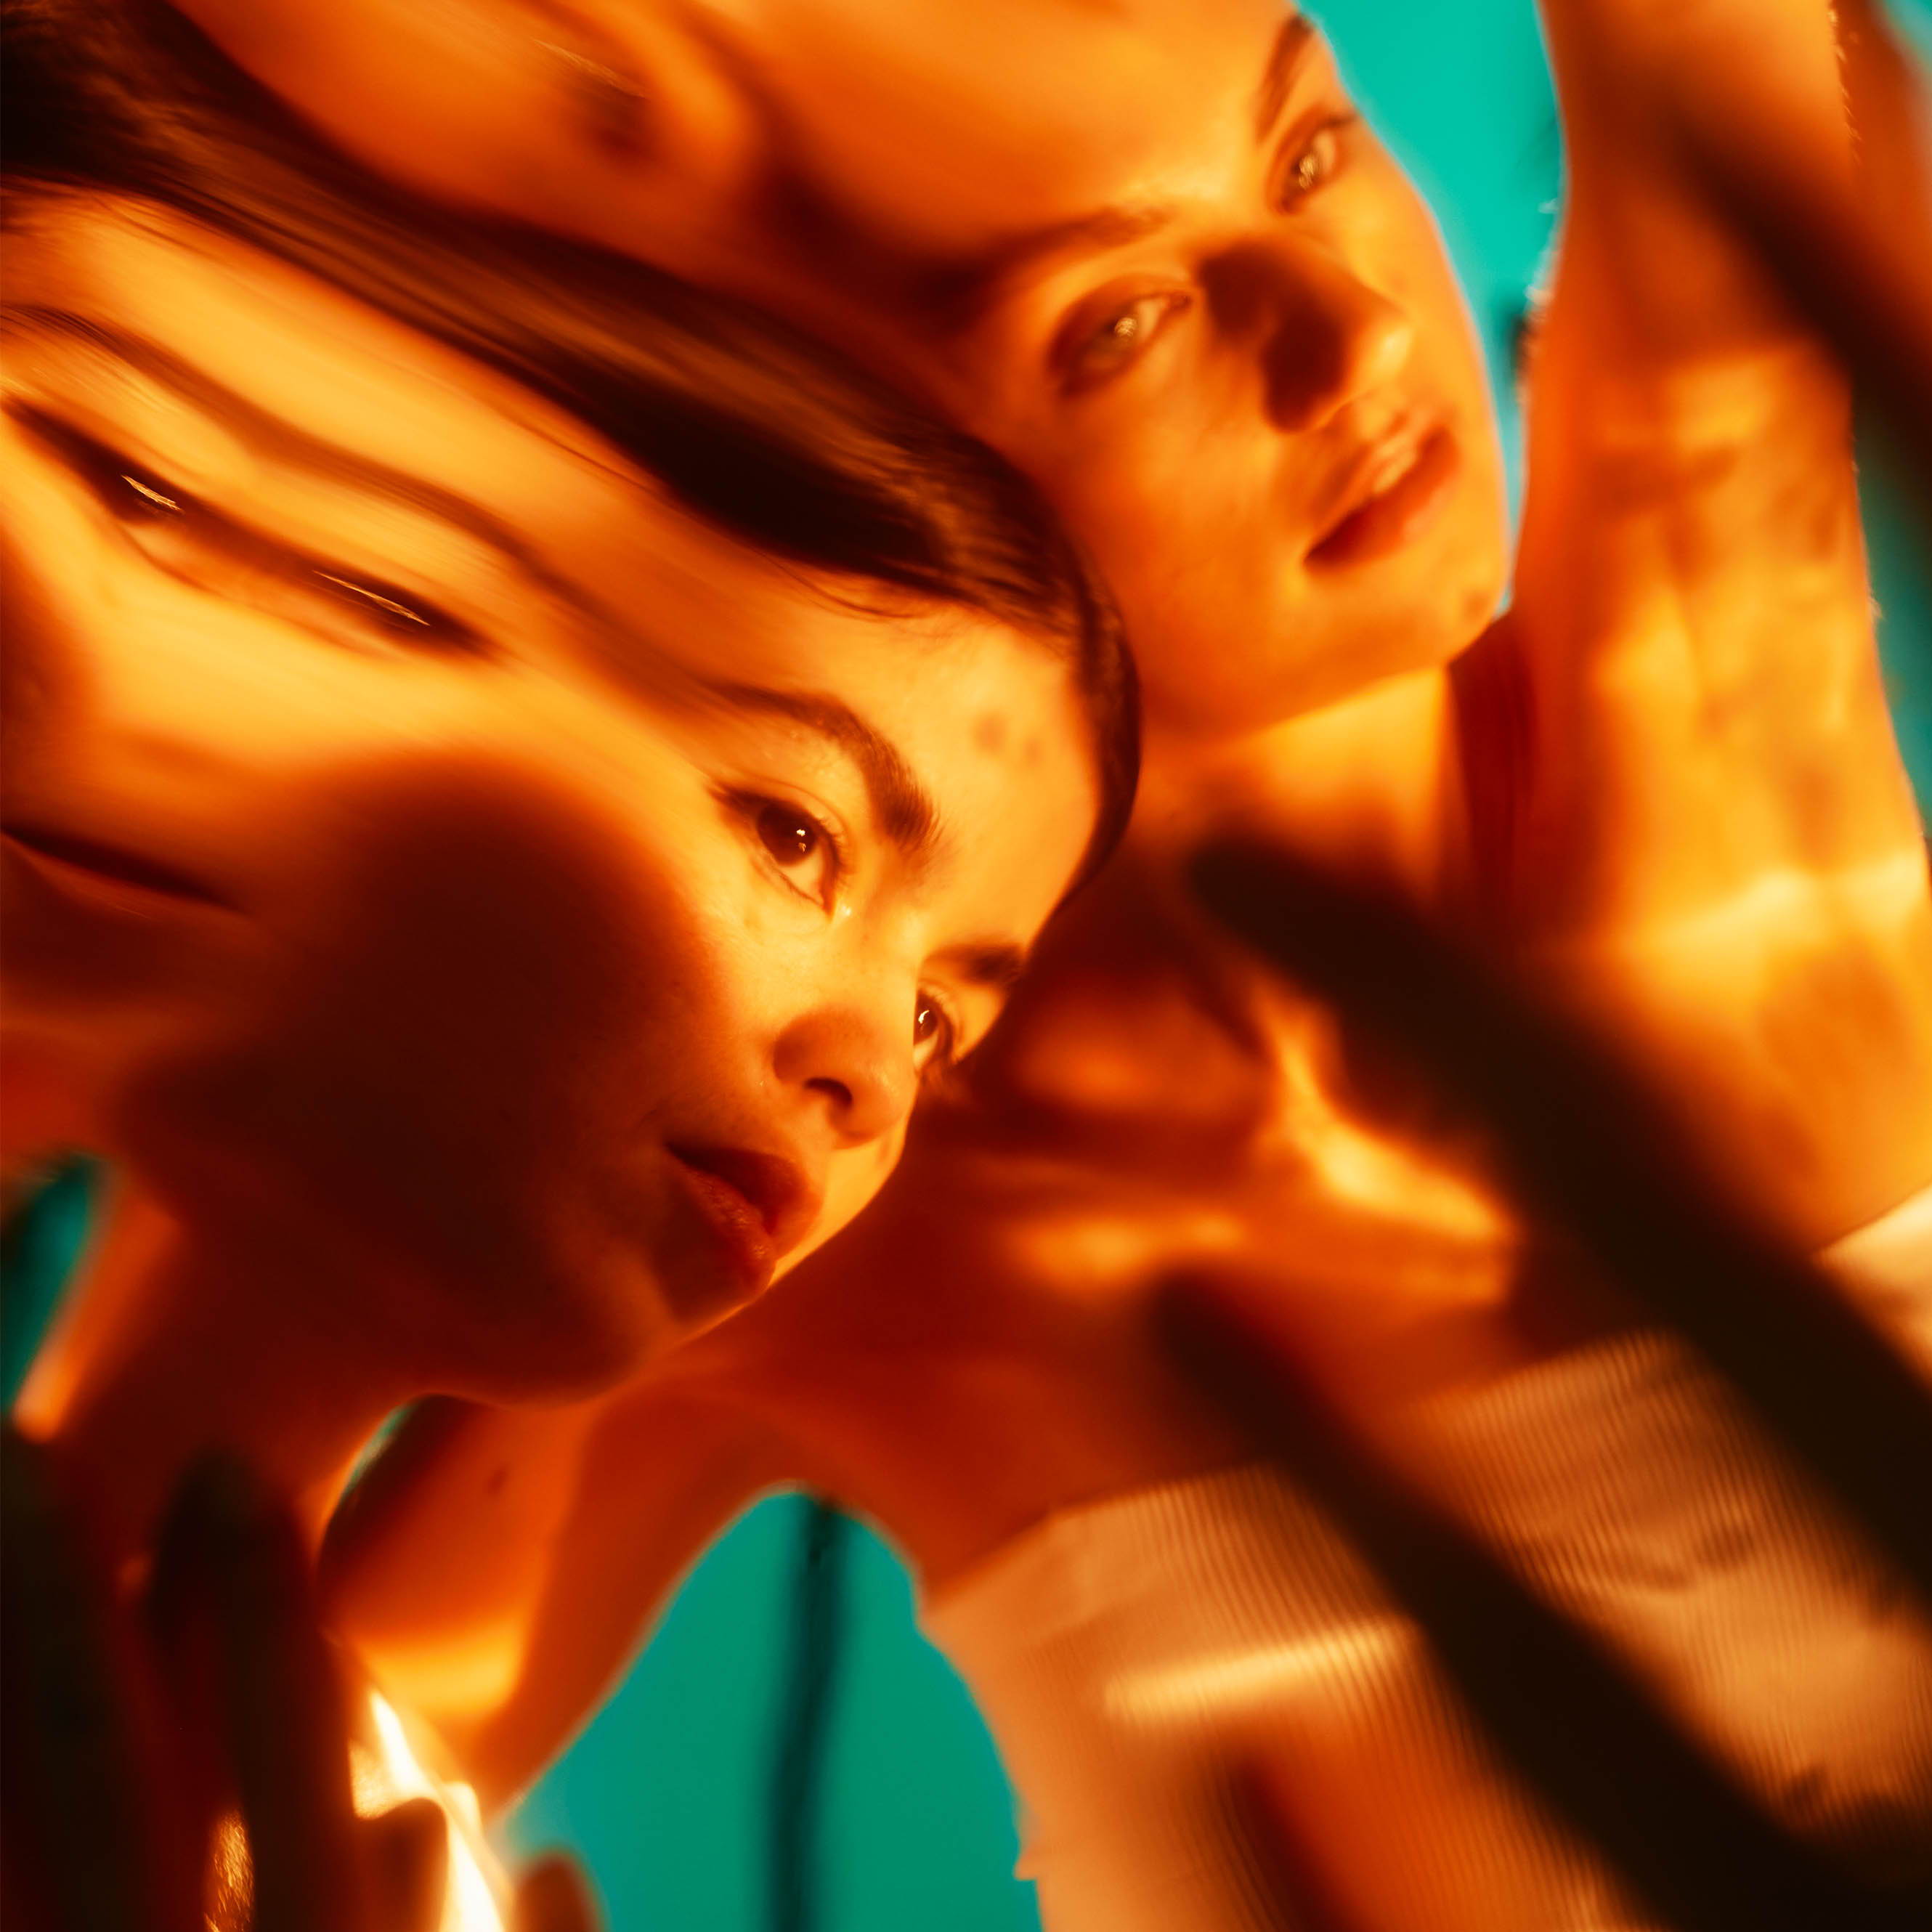 two women distorted image